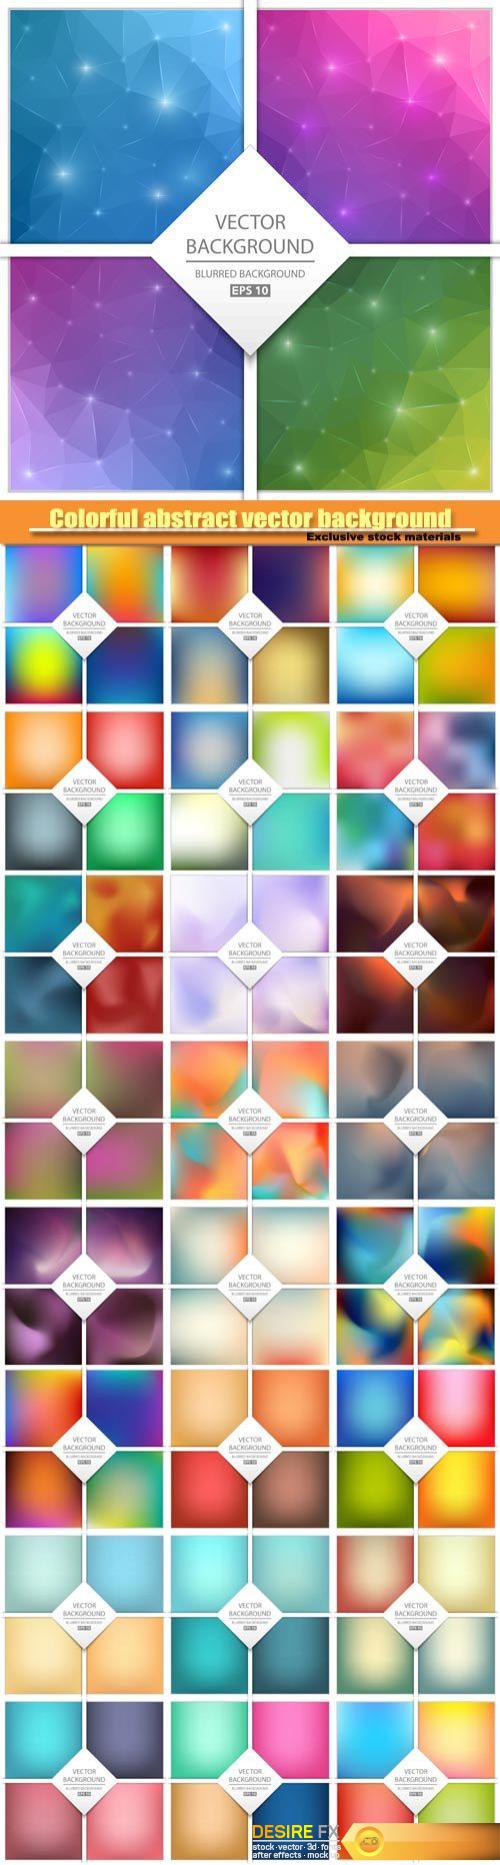 Colorful abstract vector background, art illustration template design